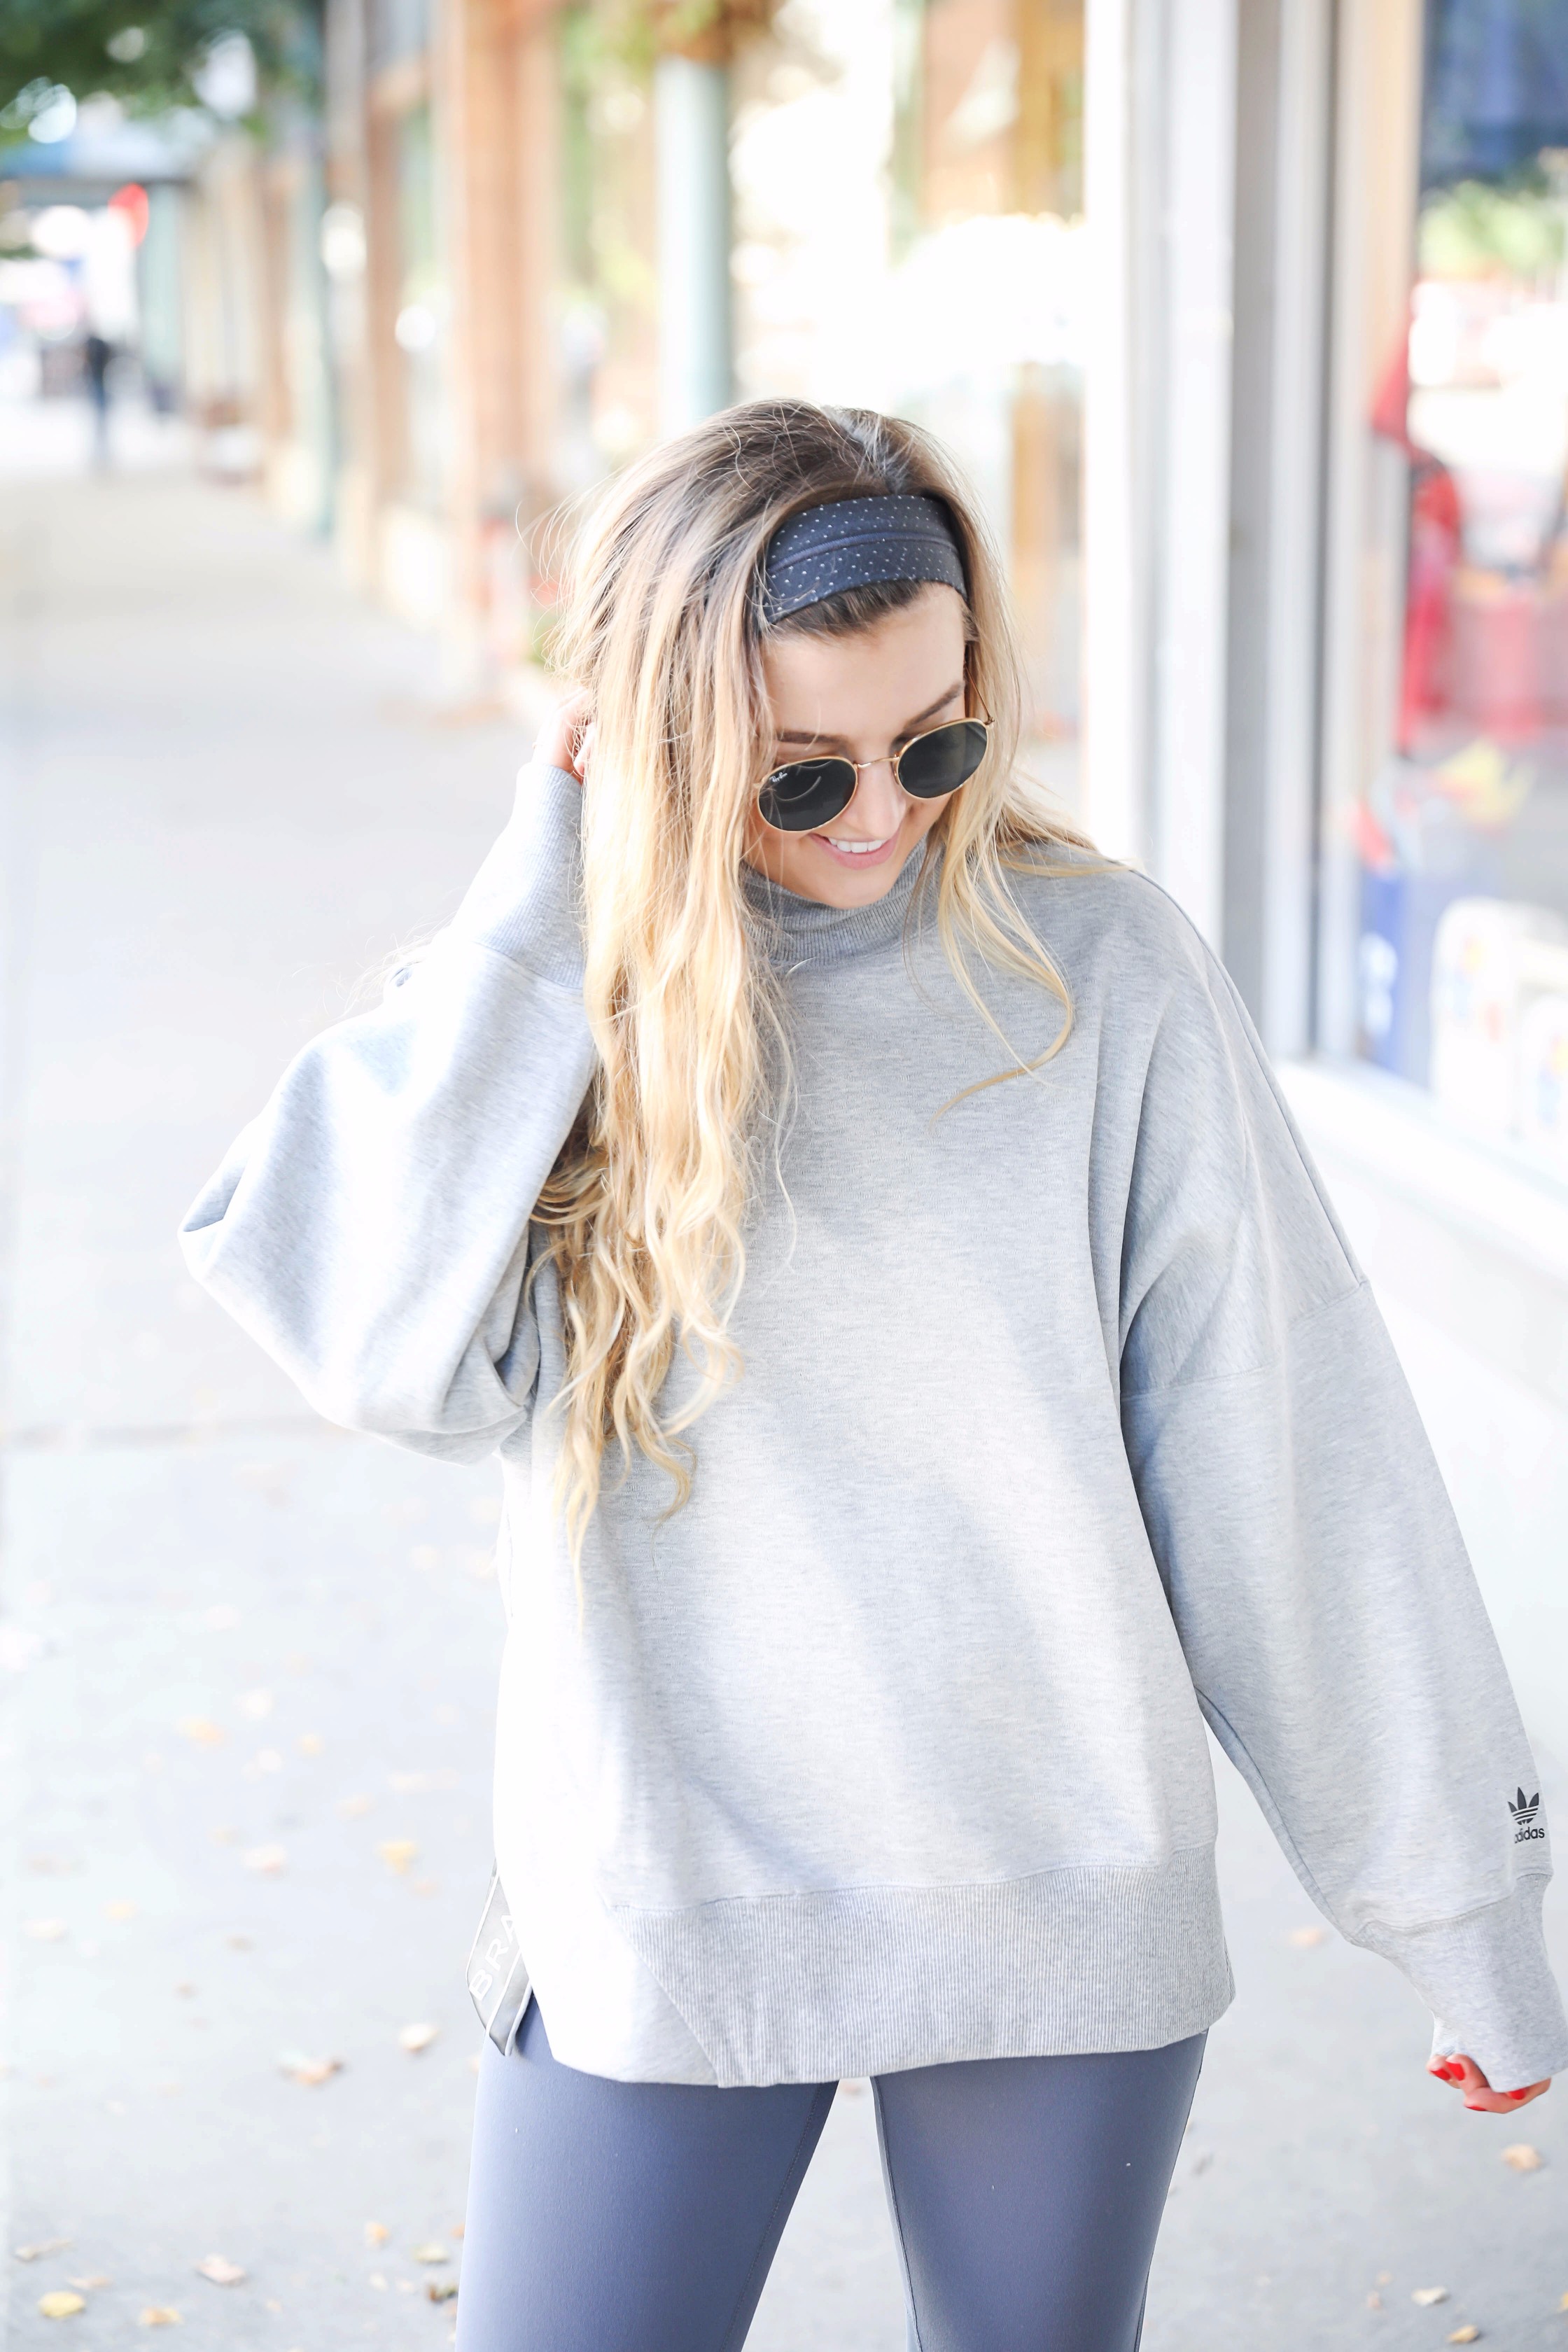 Atleisure Vibes & My Favorite Athletic Sweatshirt for Fall